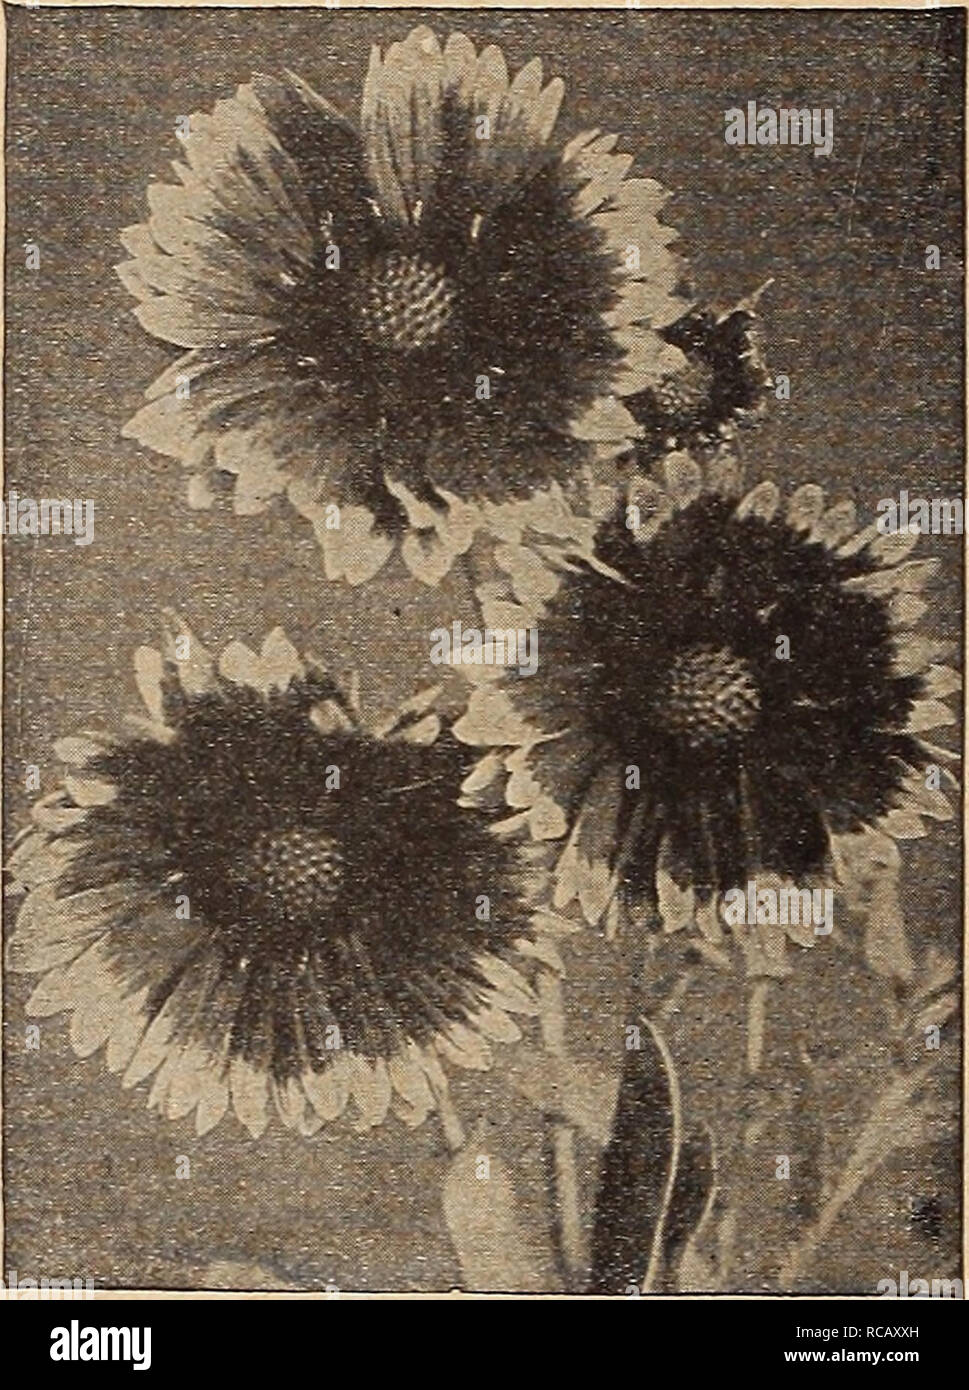 . Dreer's autumn catalogue 1917. Bulbs (Plants) Catalogs; Flowers Seeds Catalogs; Gardening Equipment and supplies Catalogs; Nurseries (Horticulture) Catalogs; Vegetables Seeds Catalogs. 46 HENRTADRKR-PtlllADELPHIA^'A- HARDY nmmi. plants. Gaillardia Grandiflora ORNAMENTAI^ GRASSES Arrhenatherum bulbosum variegatum. A pretty dwarf tufted grass; leaves green and white, Elymus Qiaucus (,Blue Lyme Grass). A handsome grass, with nar- row glaucous silvery foliage. Erianthus Ravennse (Plume Grass or Hardy Pampas). Grows from 10 to 12 feet high. It closely resembles the Pampas Grass. Eulalia Qracillim Stock Photo